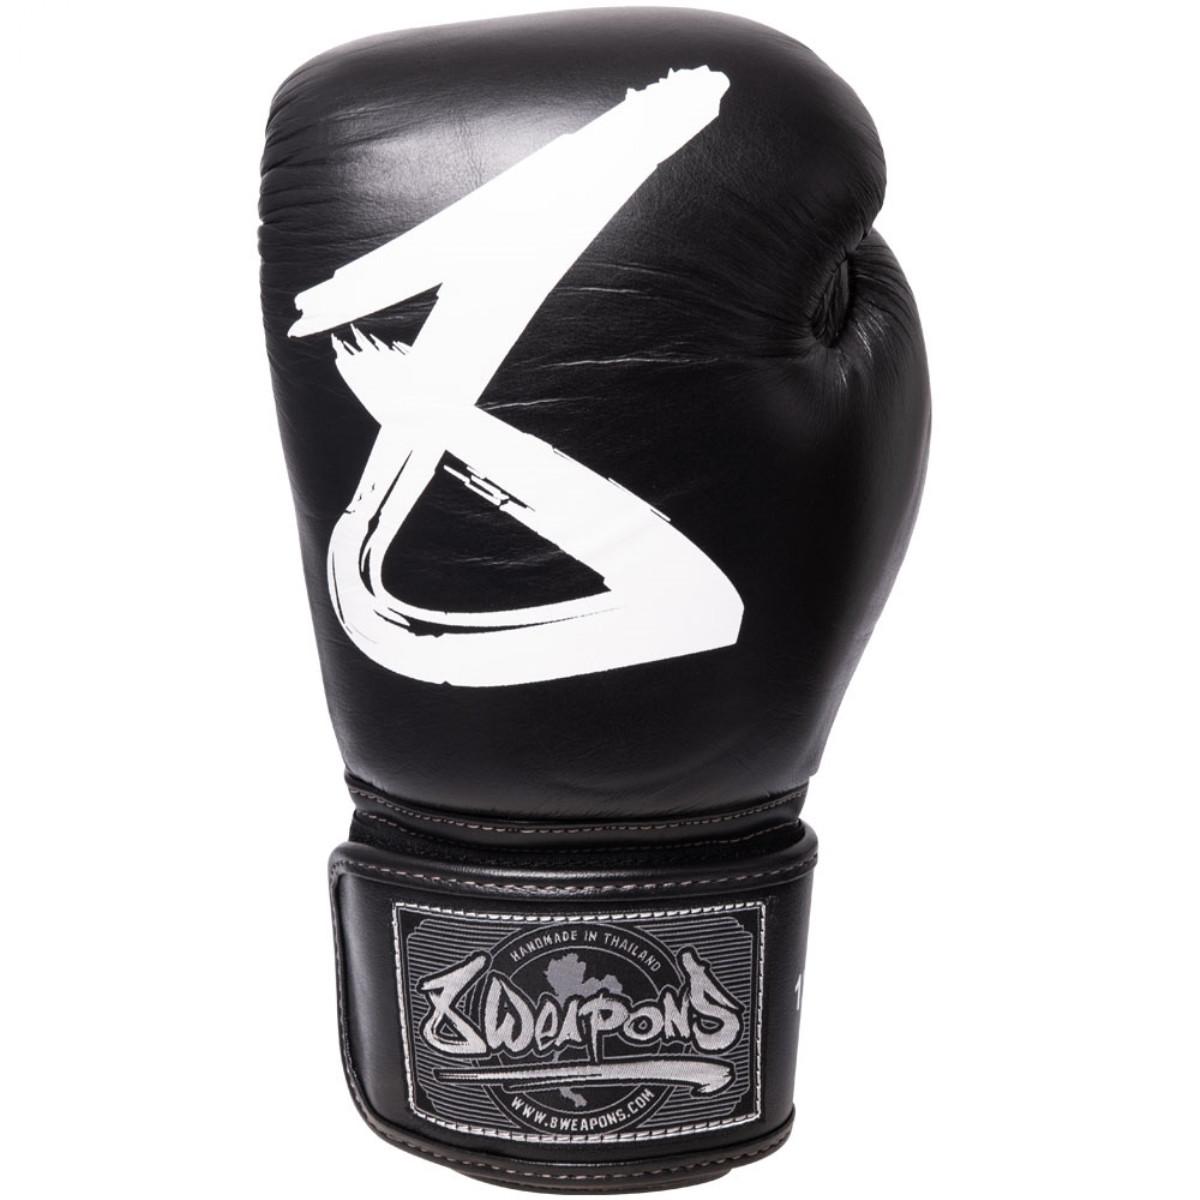 8WEAPONS  8 Weapons Boxing Gloves - BIG 8 Premium 